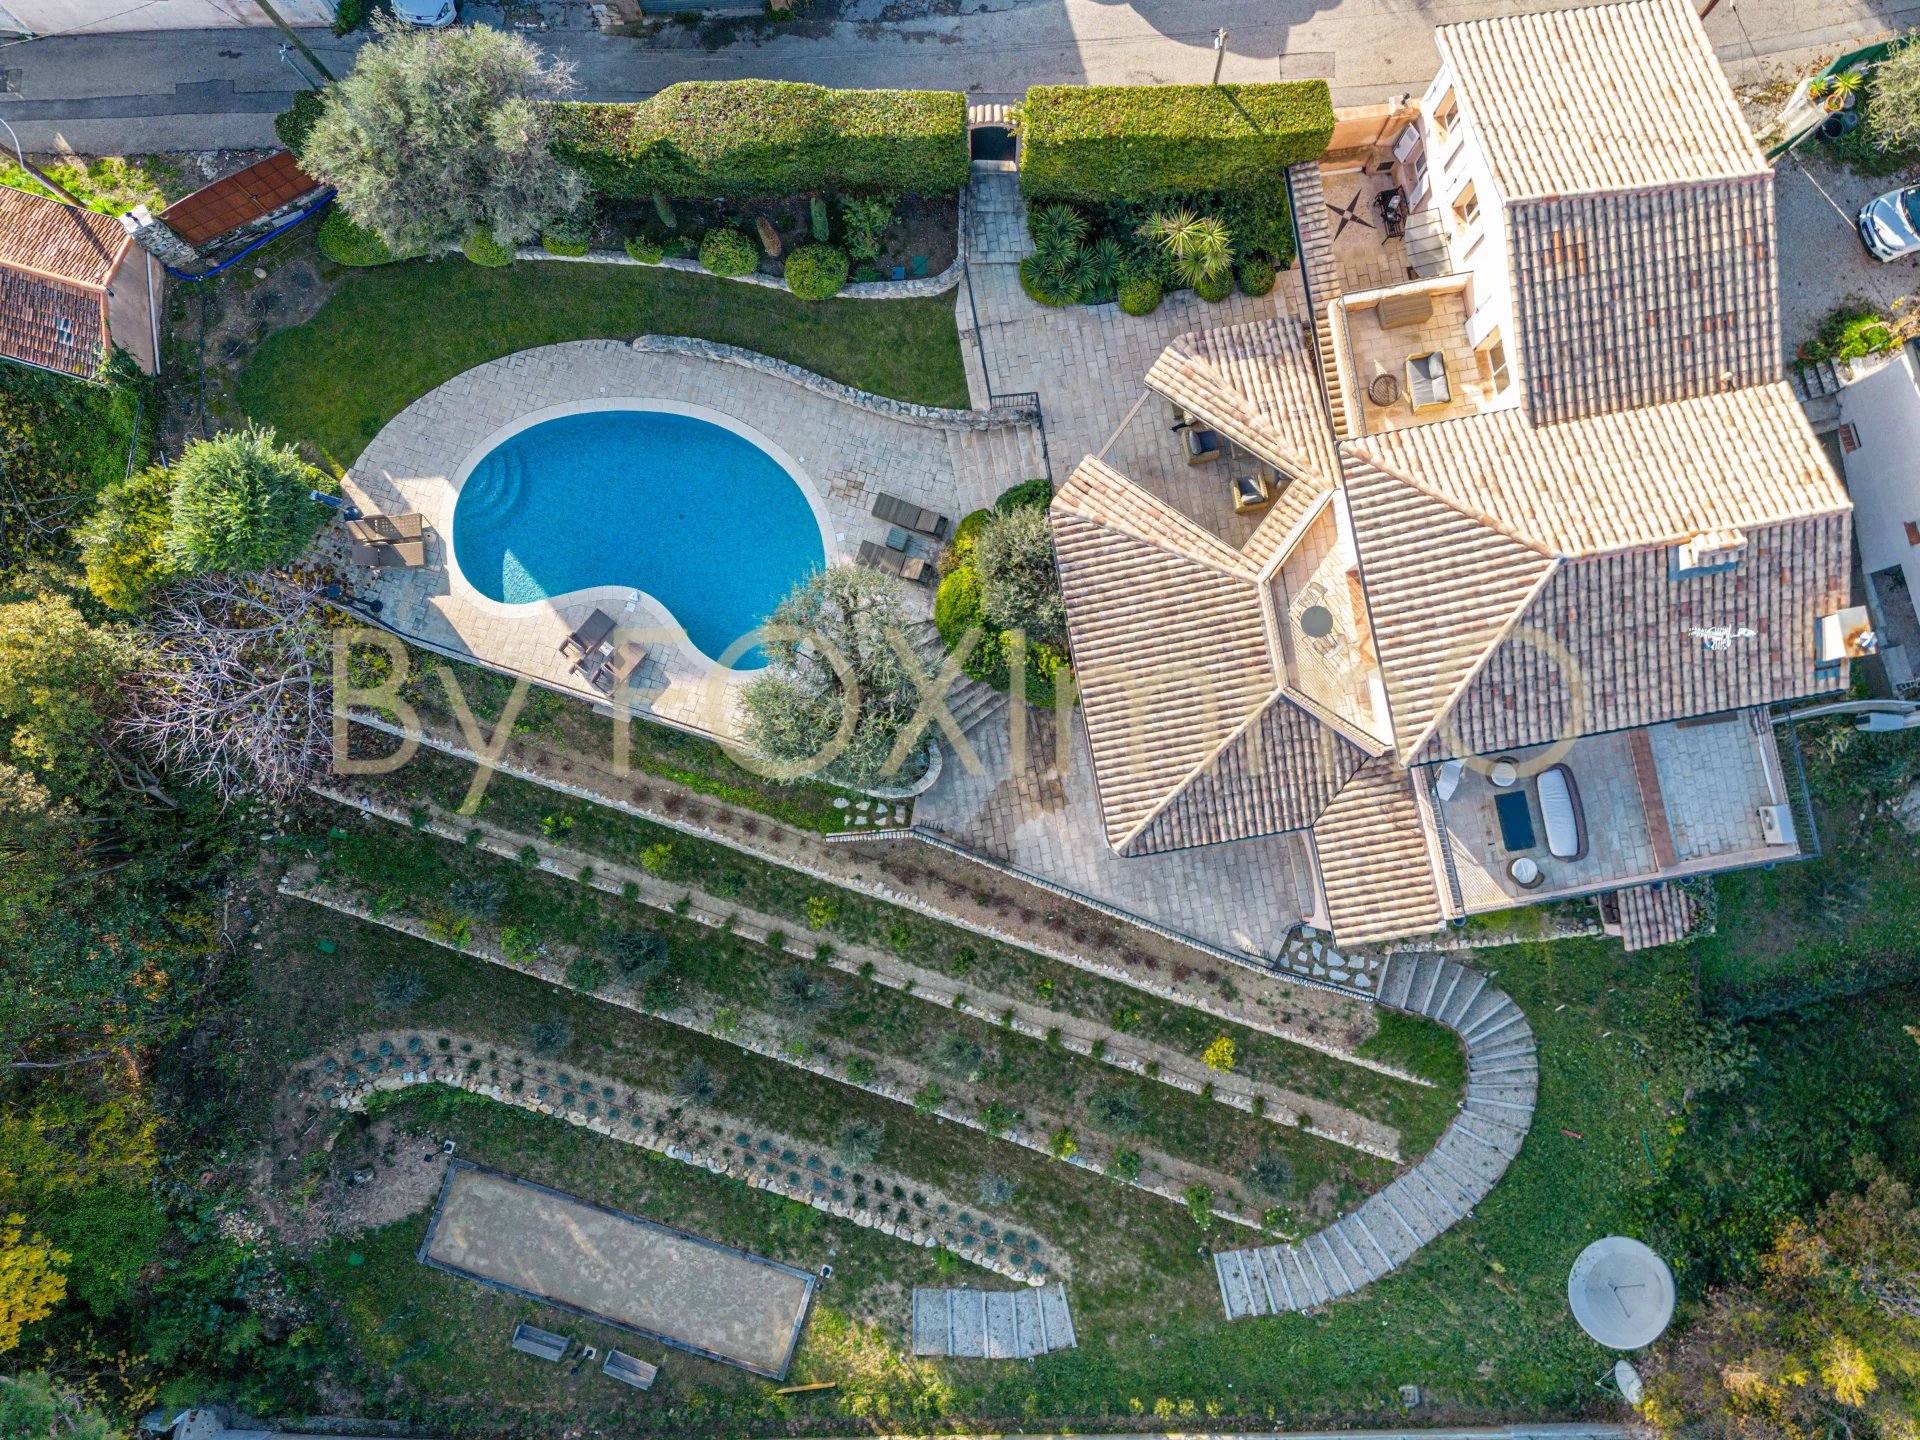 For sale Vence CENTRE VILLE, Magnificent villa, Panoramic sea and mountain view, 5/6 bedrooms, Renovated Luxury, pool, garage